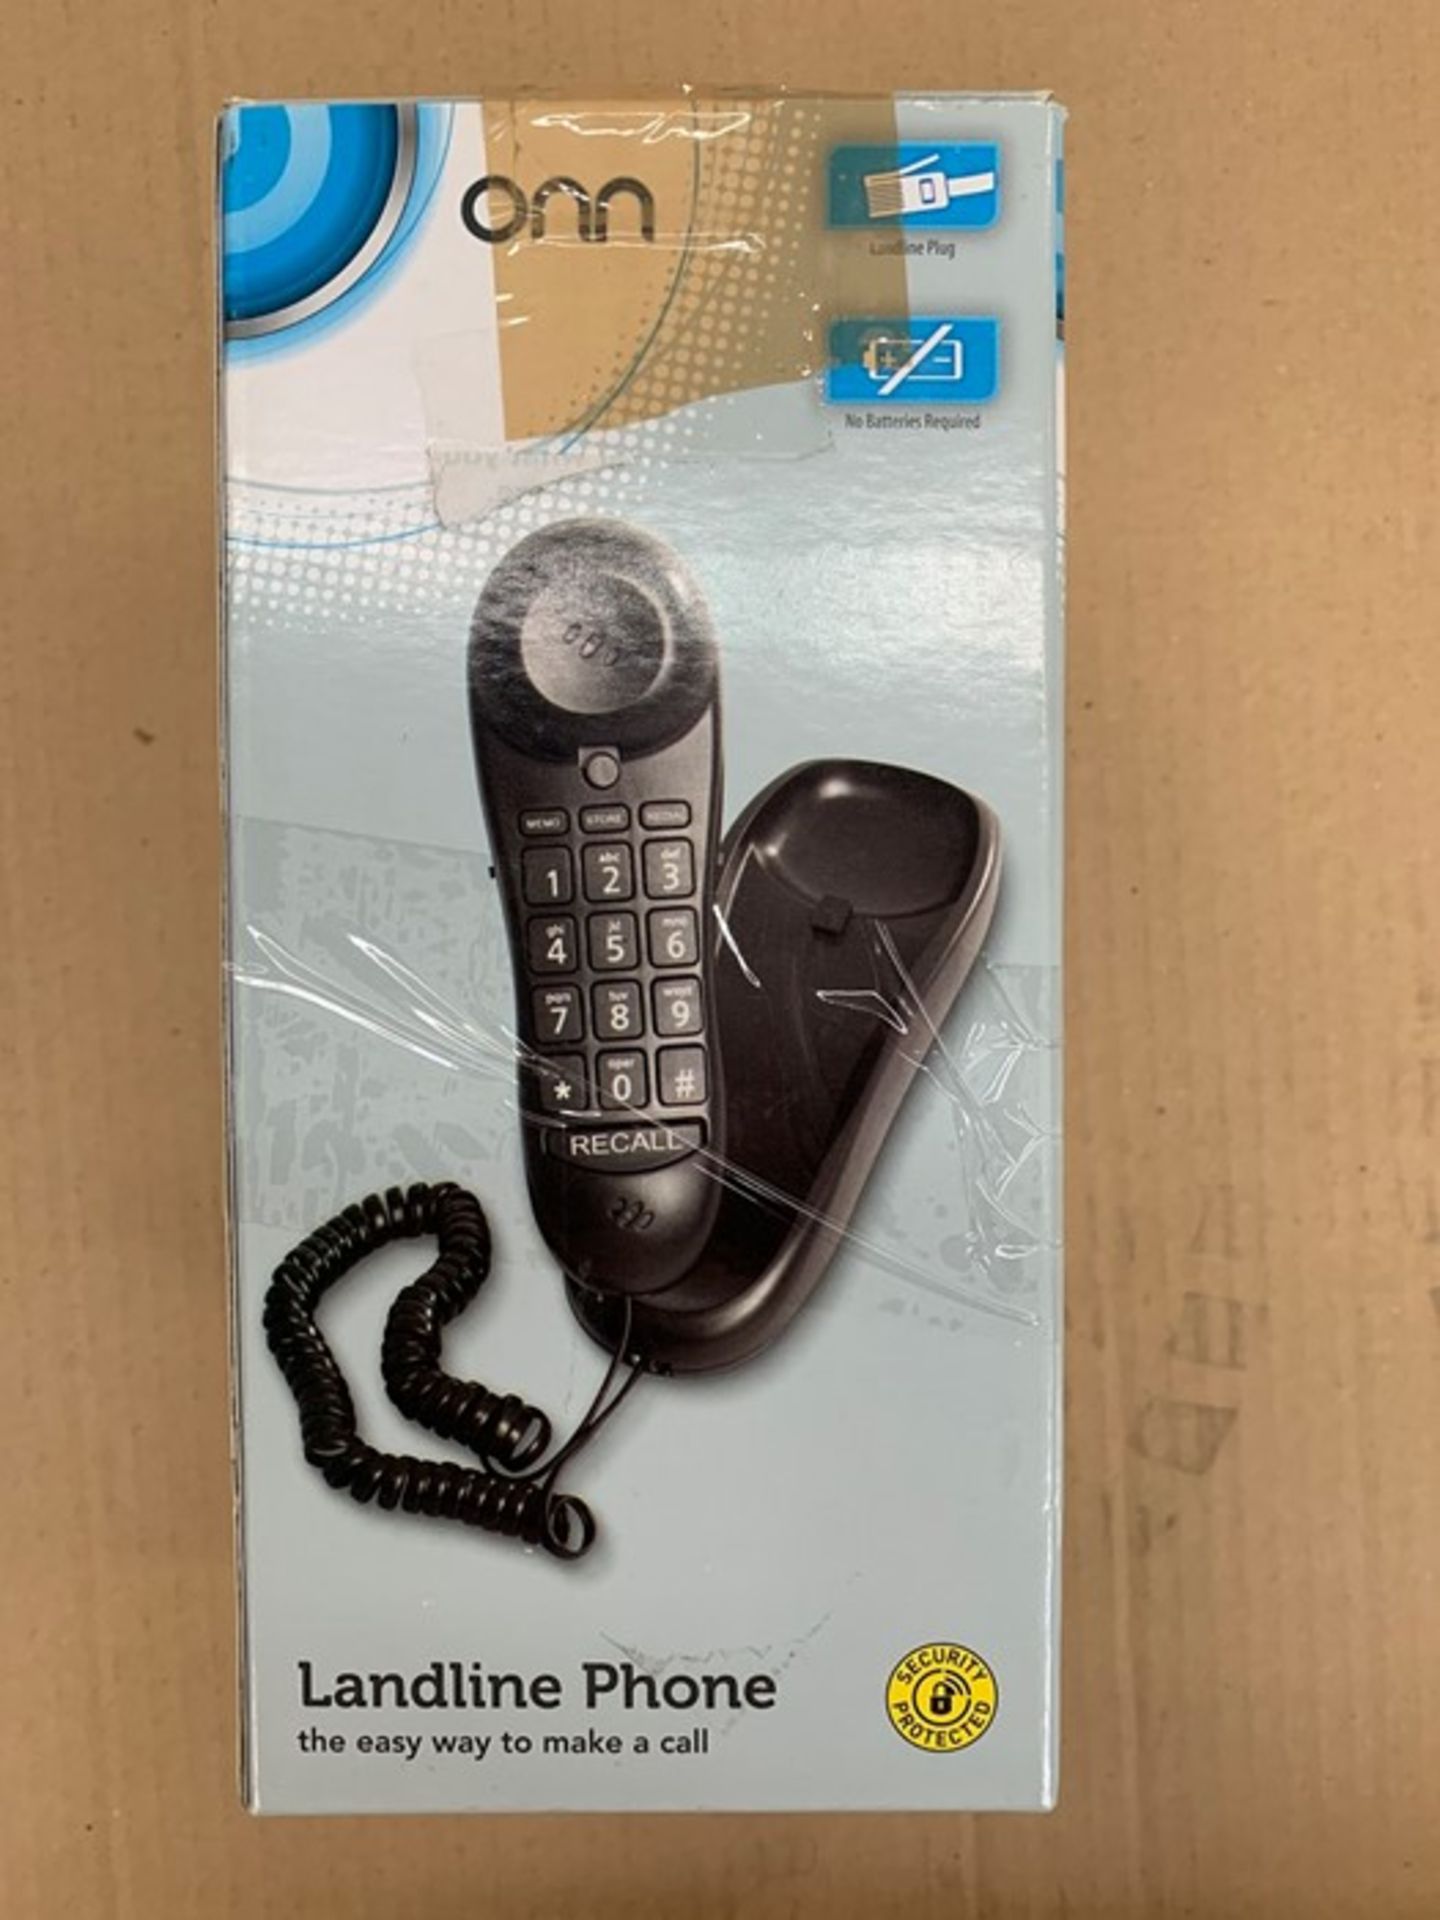 2 BOXED ONN LANDLINE PHONES IN BLACK / BL - 6971 (PUBLIC VIEWING AVAILABLE)